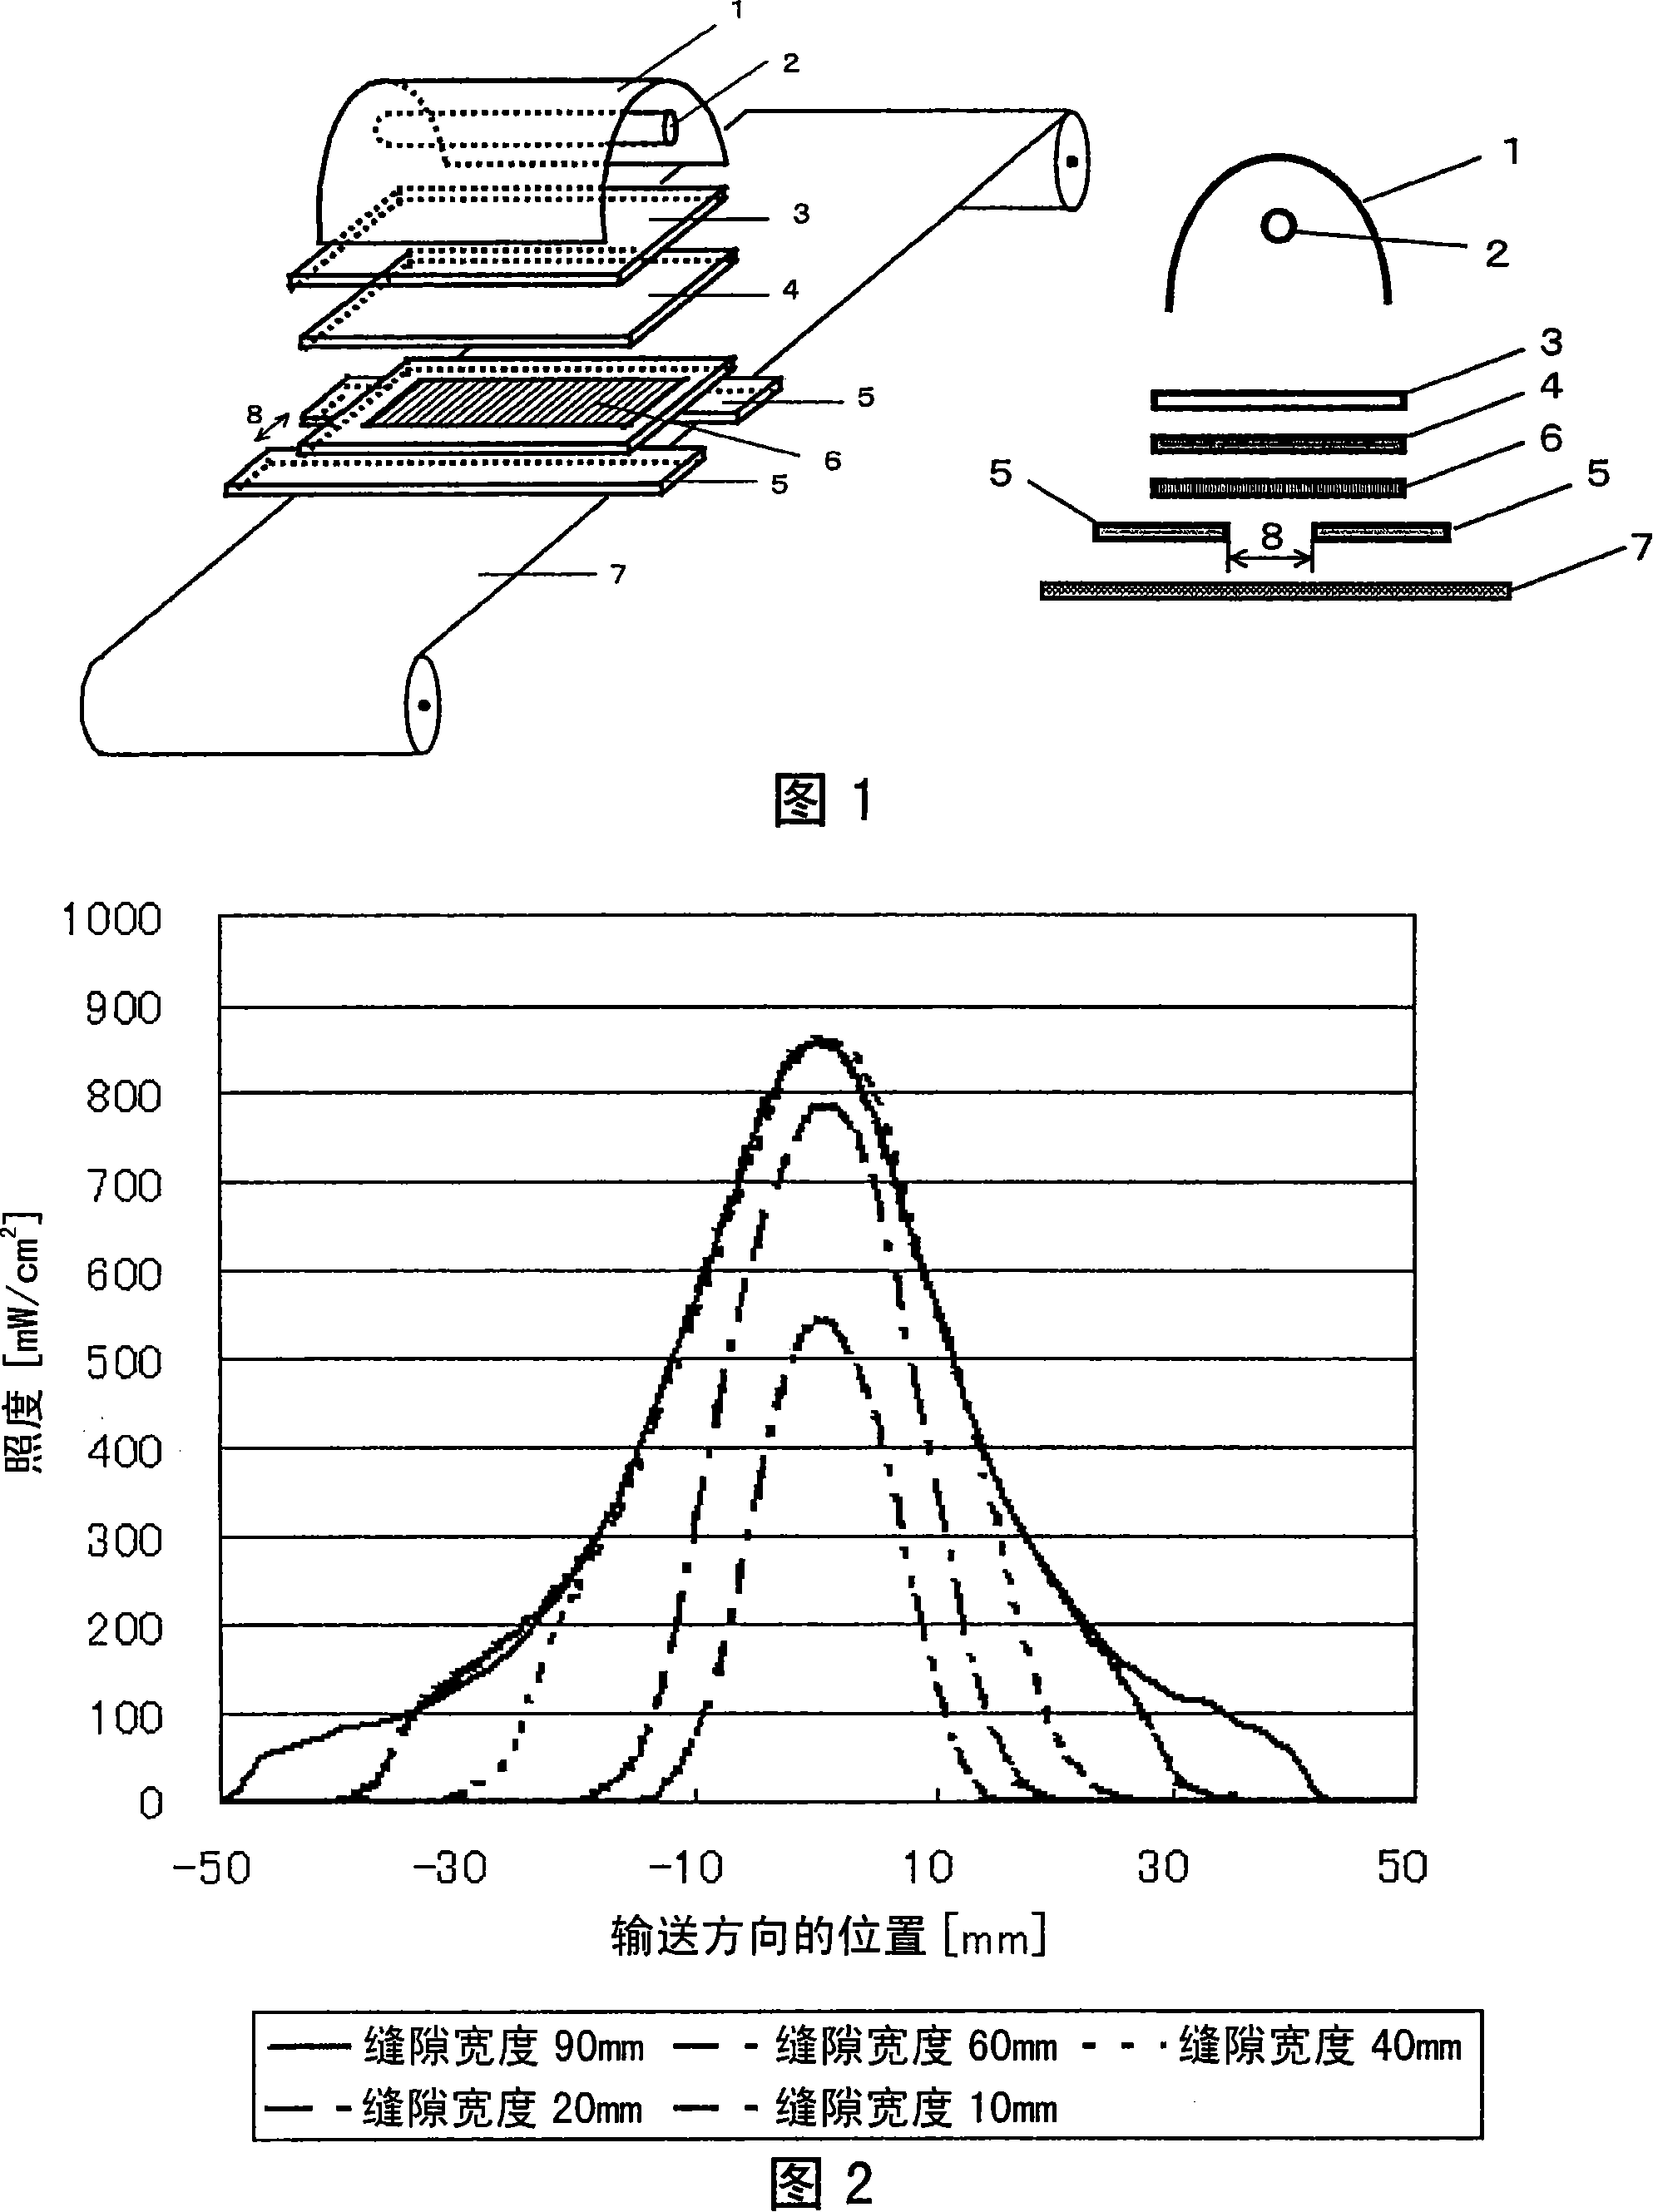 Method of producing optical film, optical film, polarizer plate, transfer material, liquid crystal display device, and polarized ultraviolet exposure apparatus